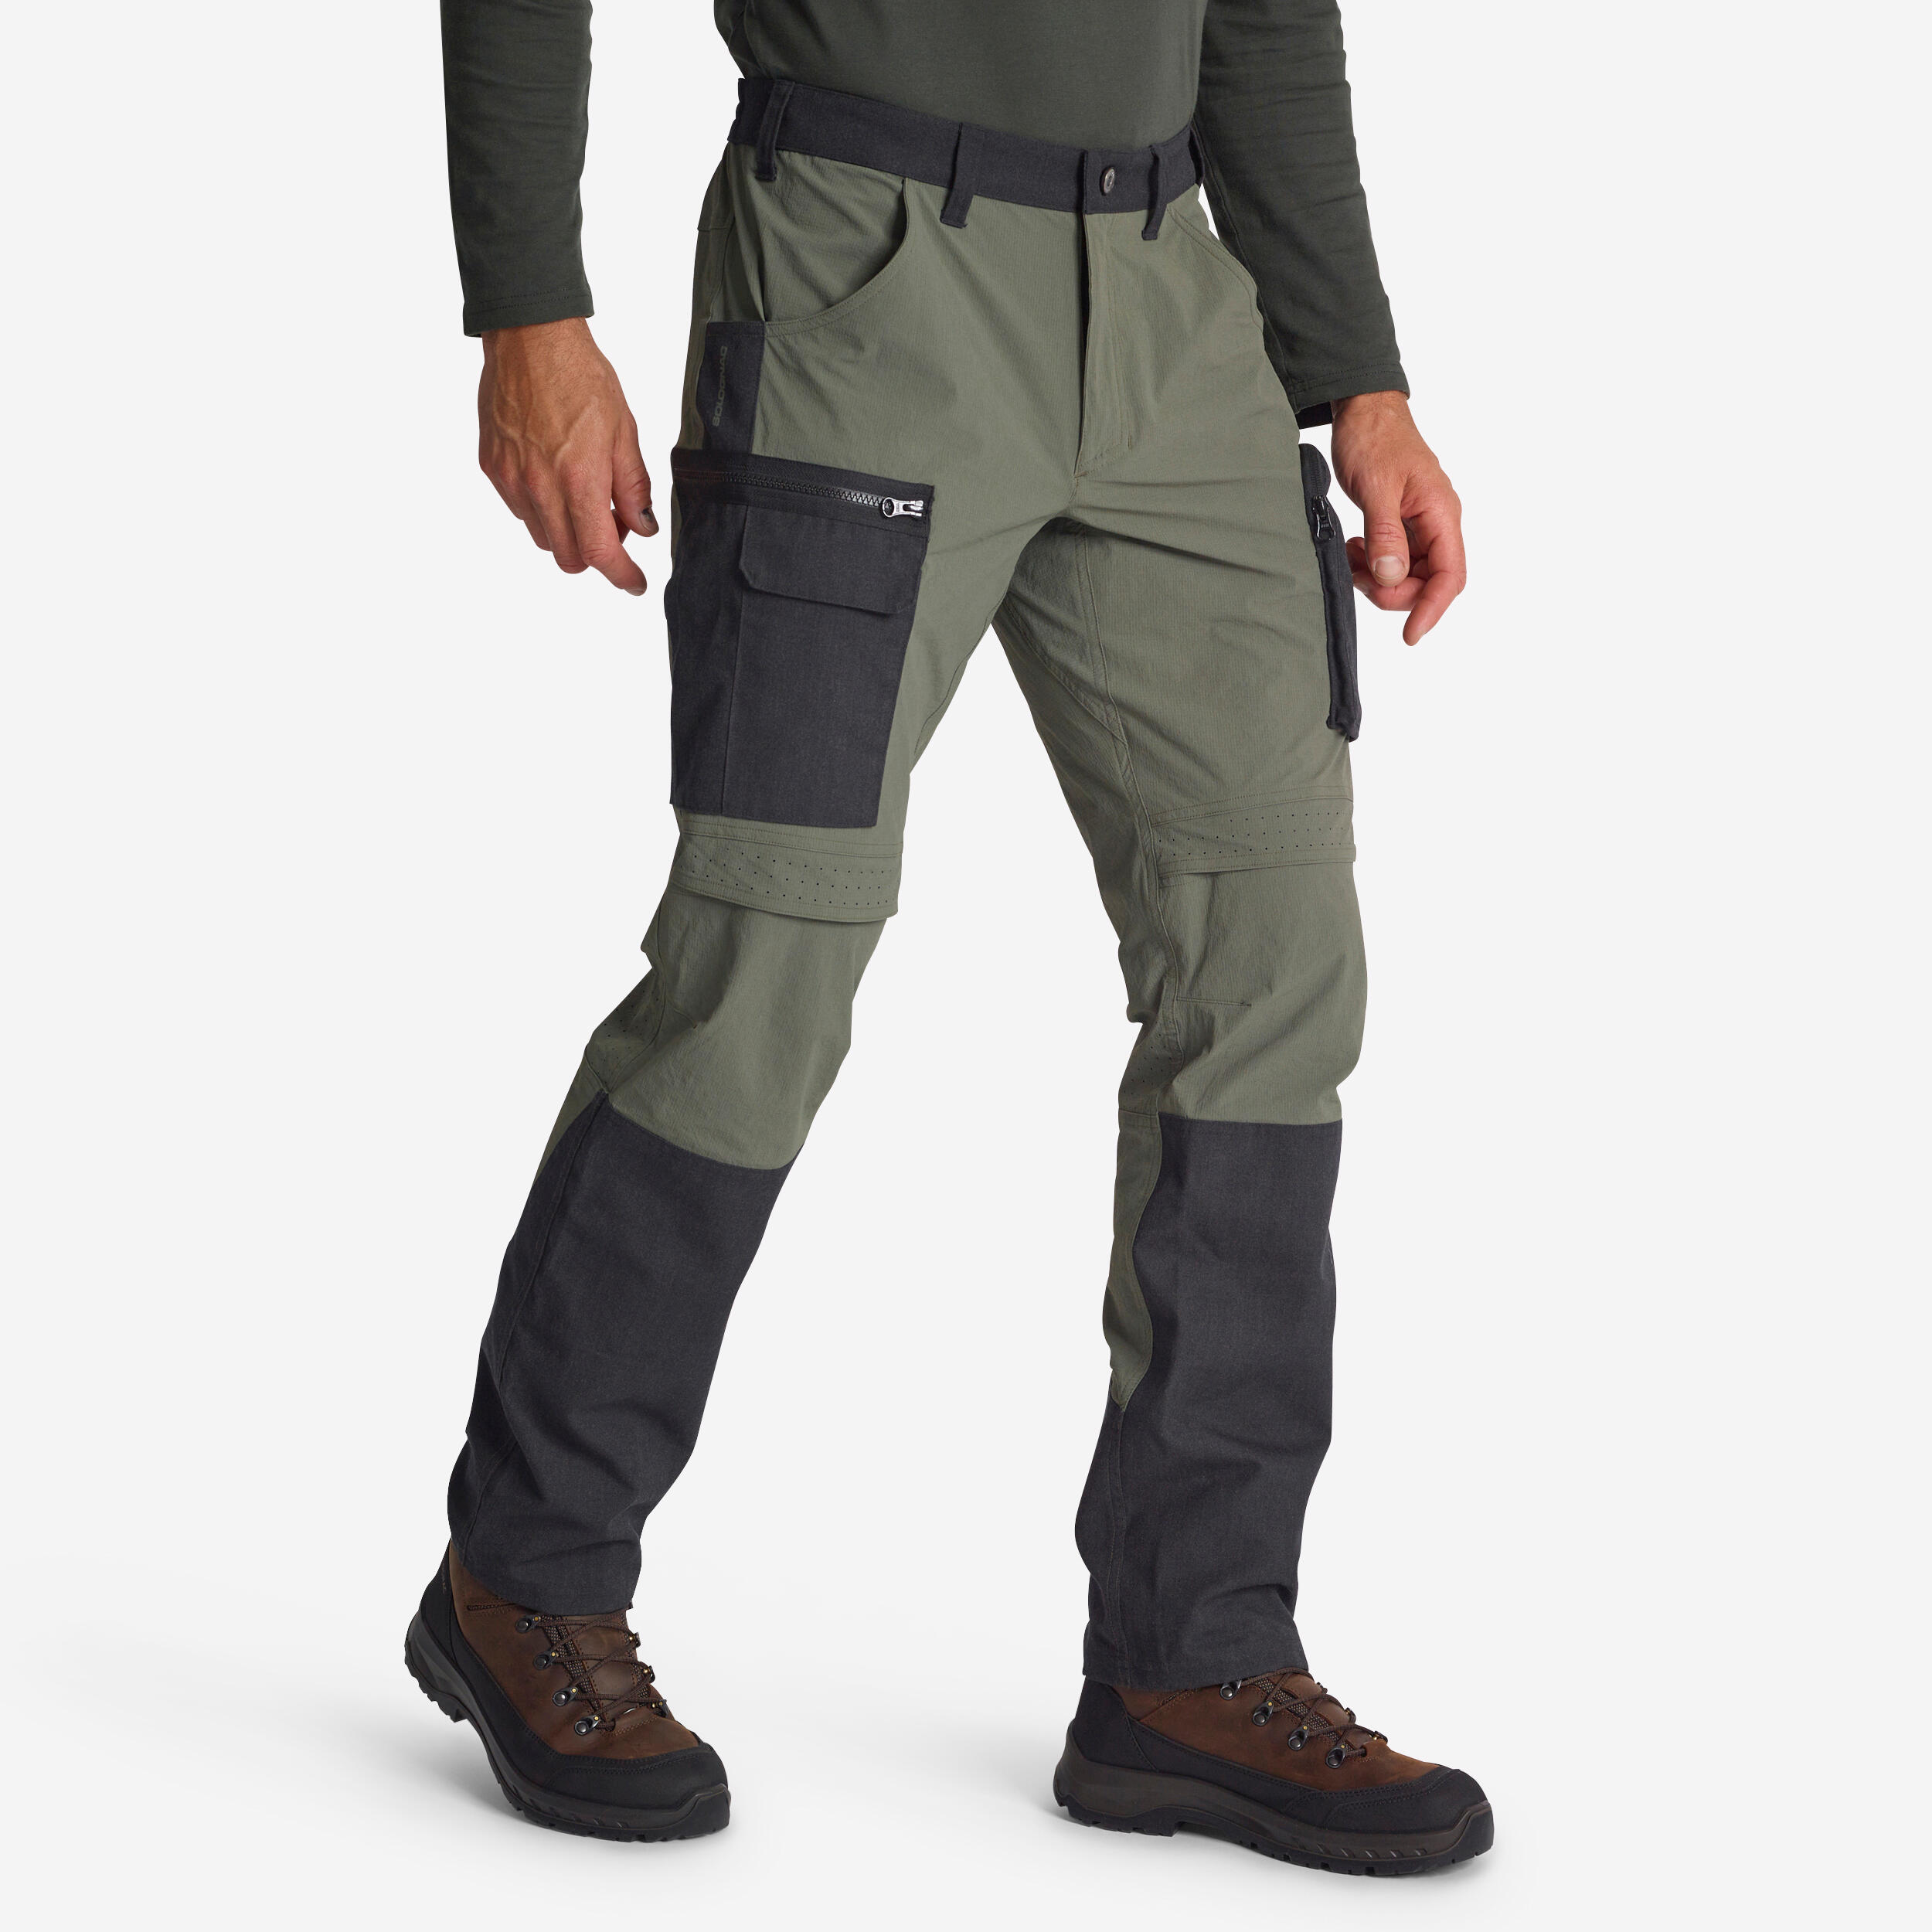 900 Lightweight Breathable Country Sport Trousers - Green 1/6